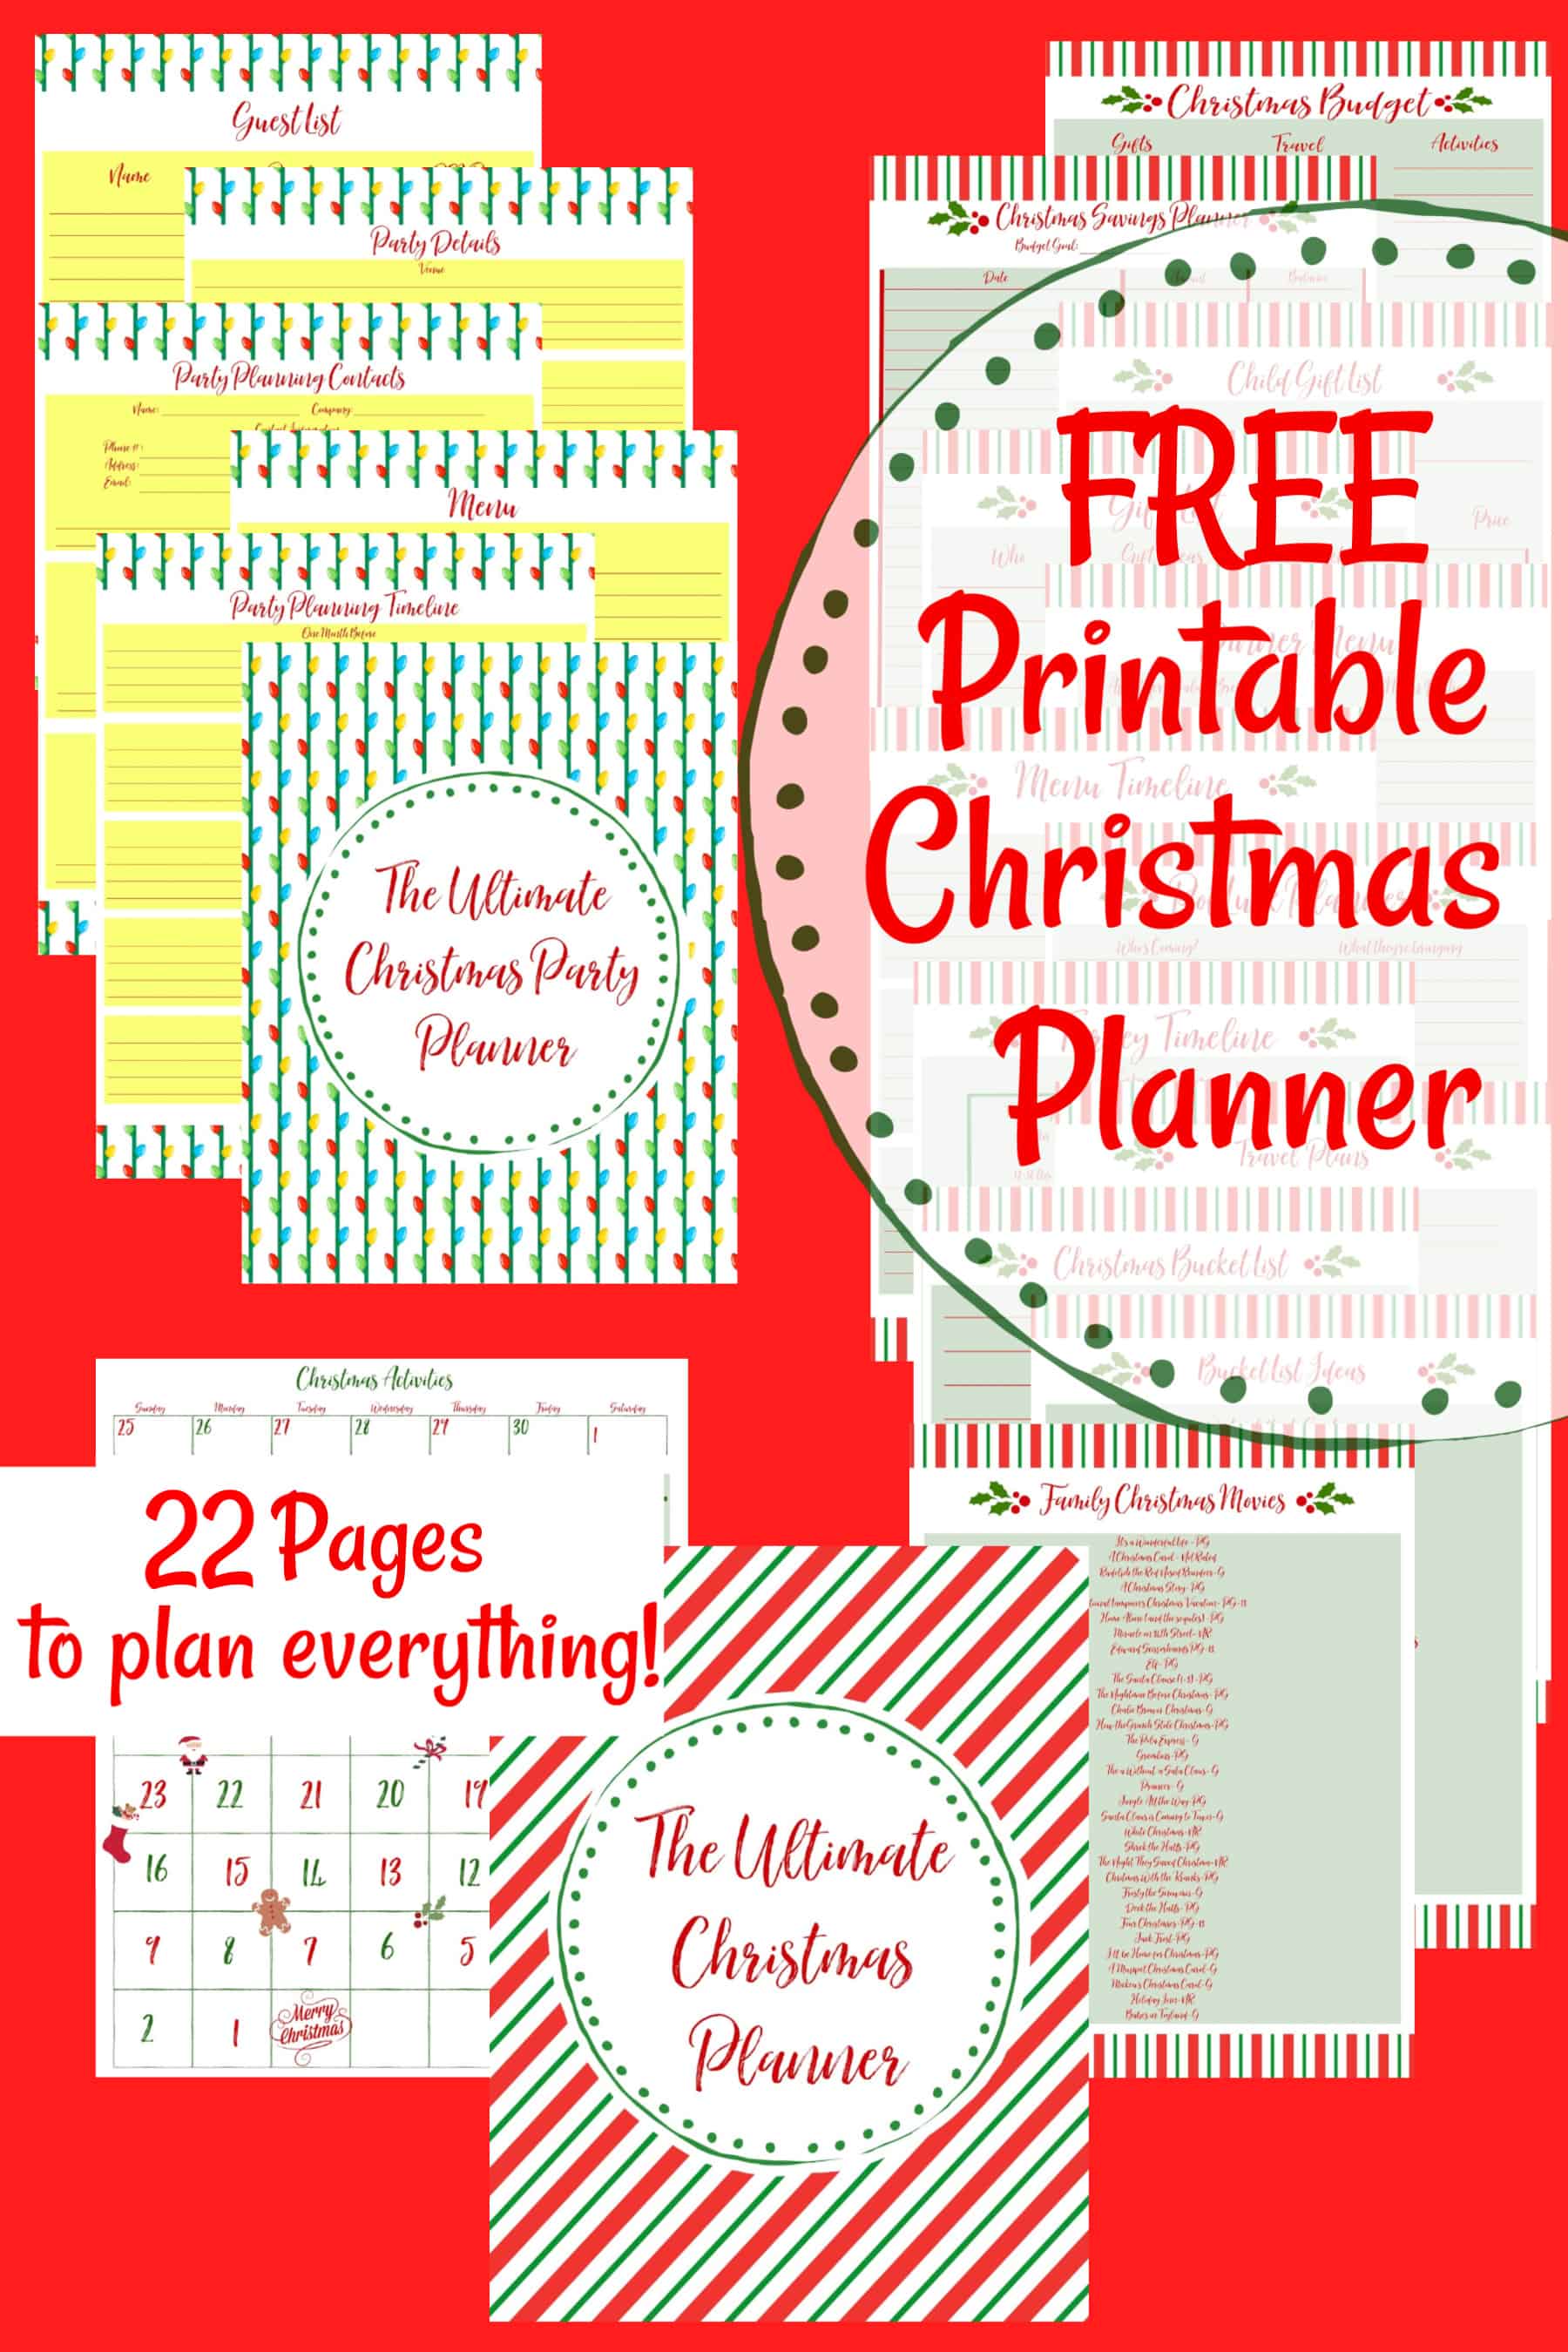 22-page-christmas-planner-printables-free-far-from-normal